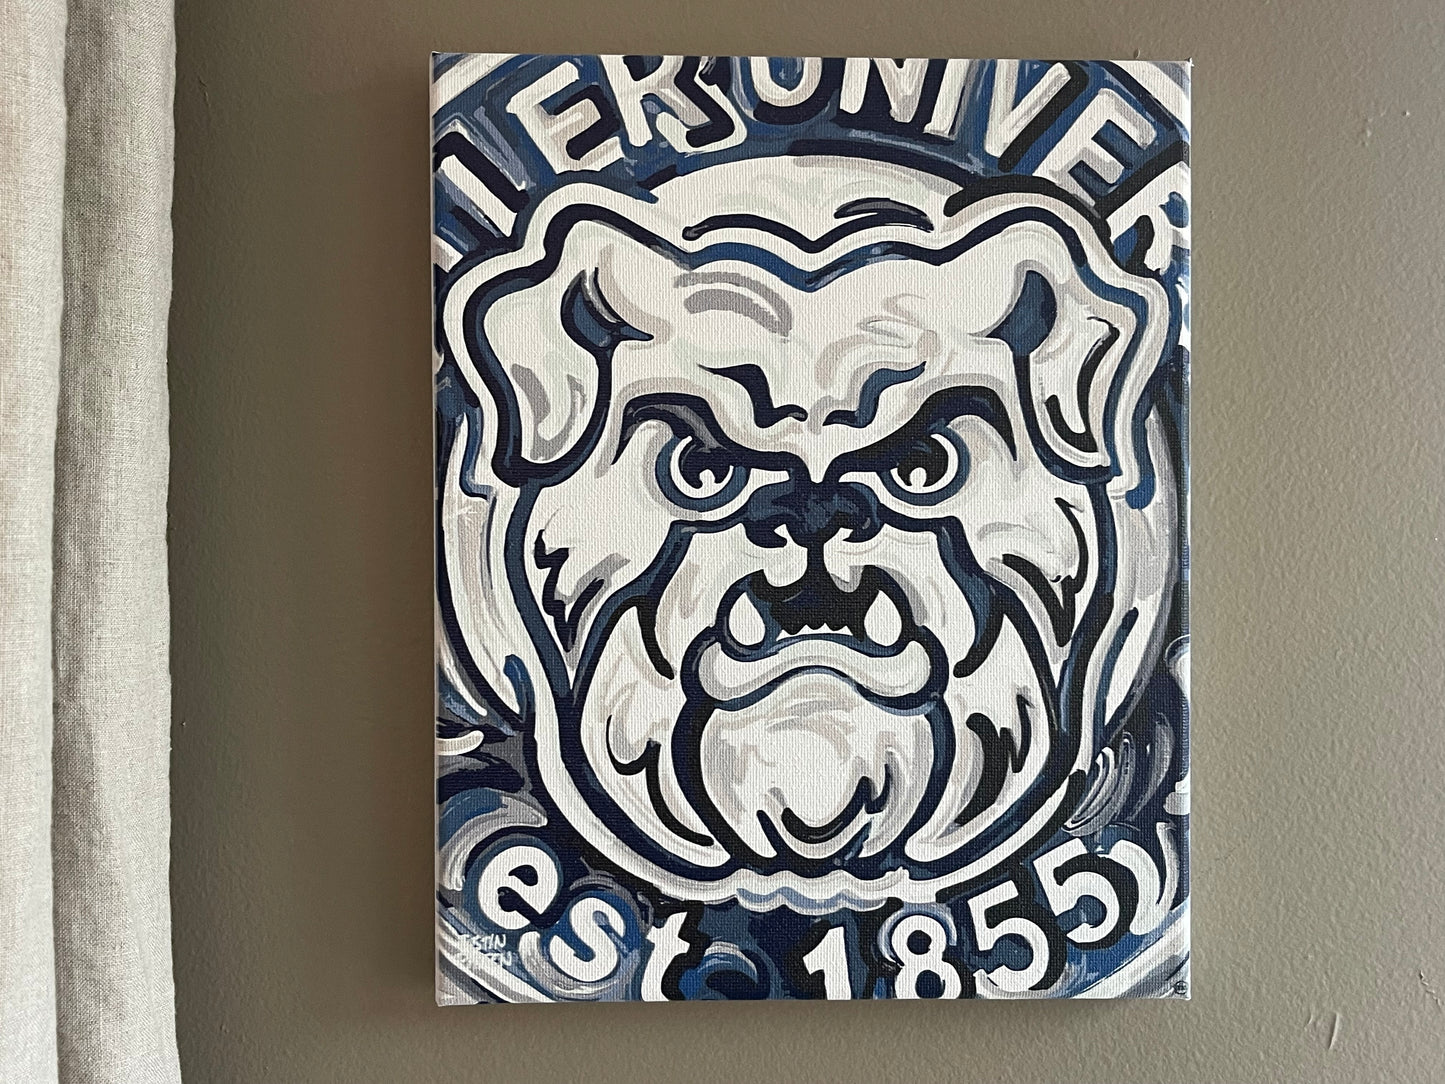 Butler University 8" x 10" Hinkle Wrapped Canvas Print by Justin Patten